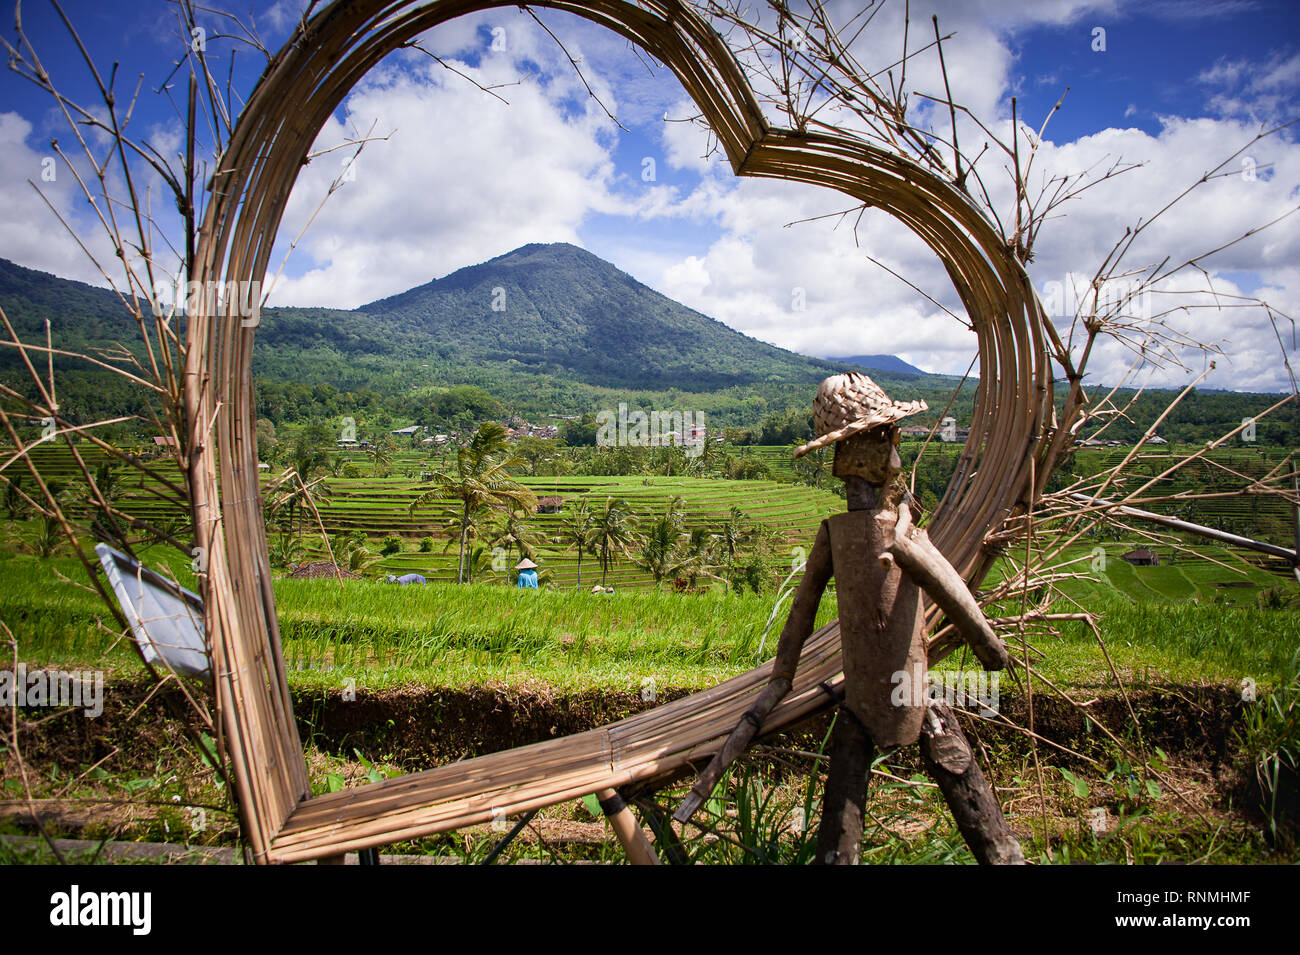 Jatiluwih Rice Terraces, Bali. Colourful scene viewed through heart shaped, rattan sculpture with plantation workers, lush green fields and mountains Stock Photo